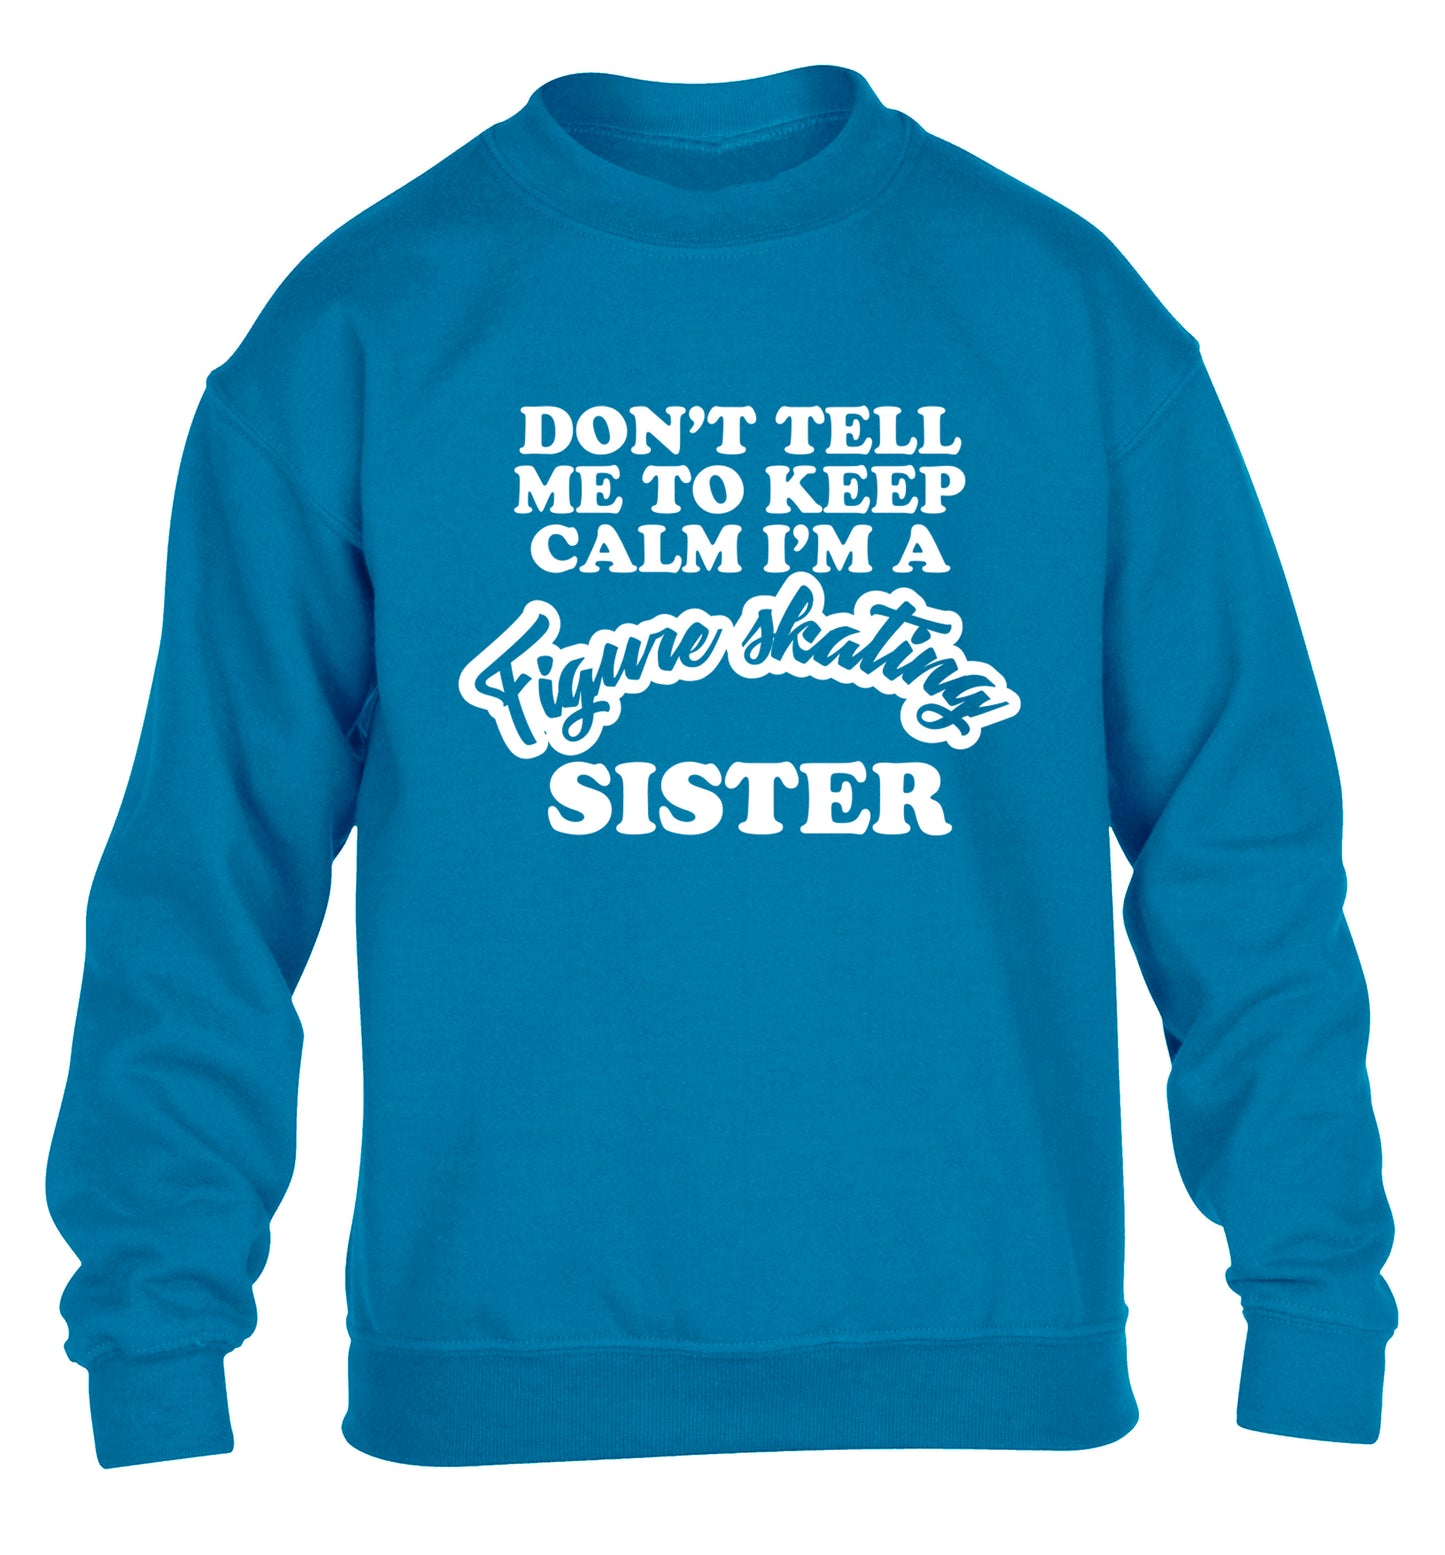 Don't tell me to keep calm I'm a figure skating sister children's blue sweater 12-14 Years